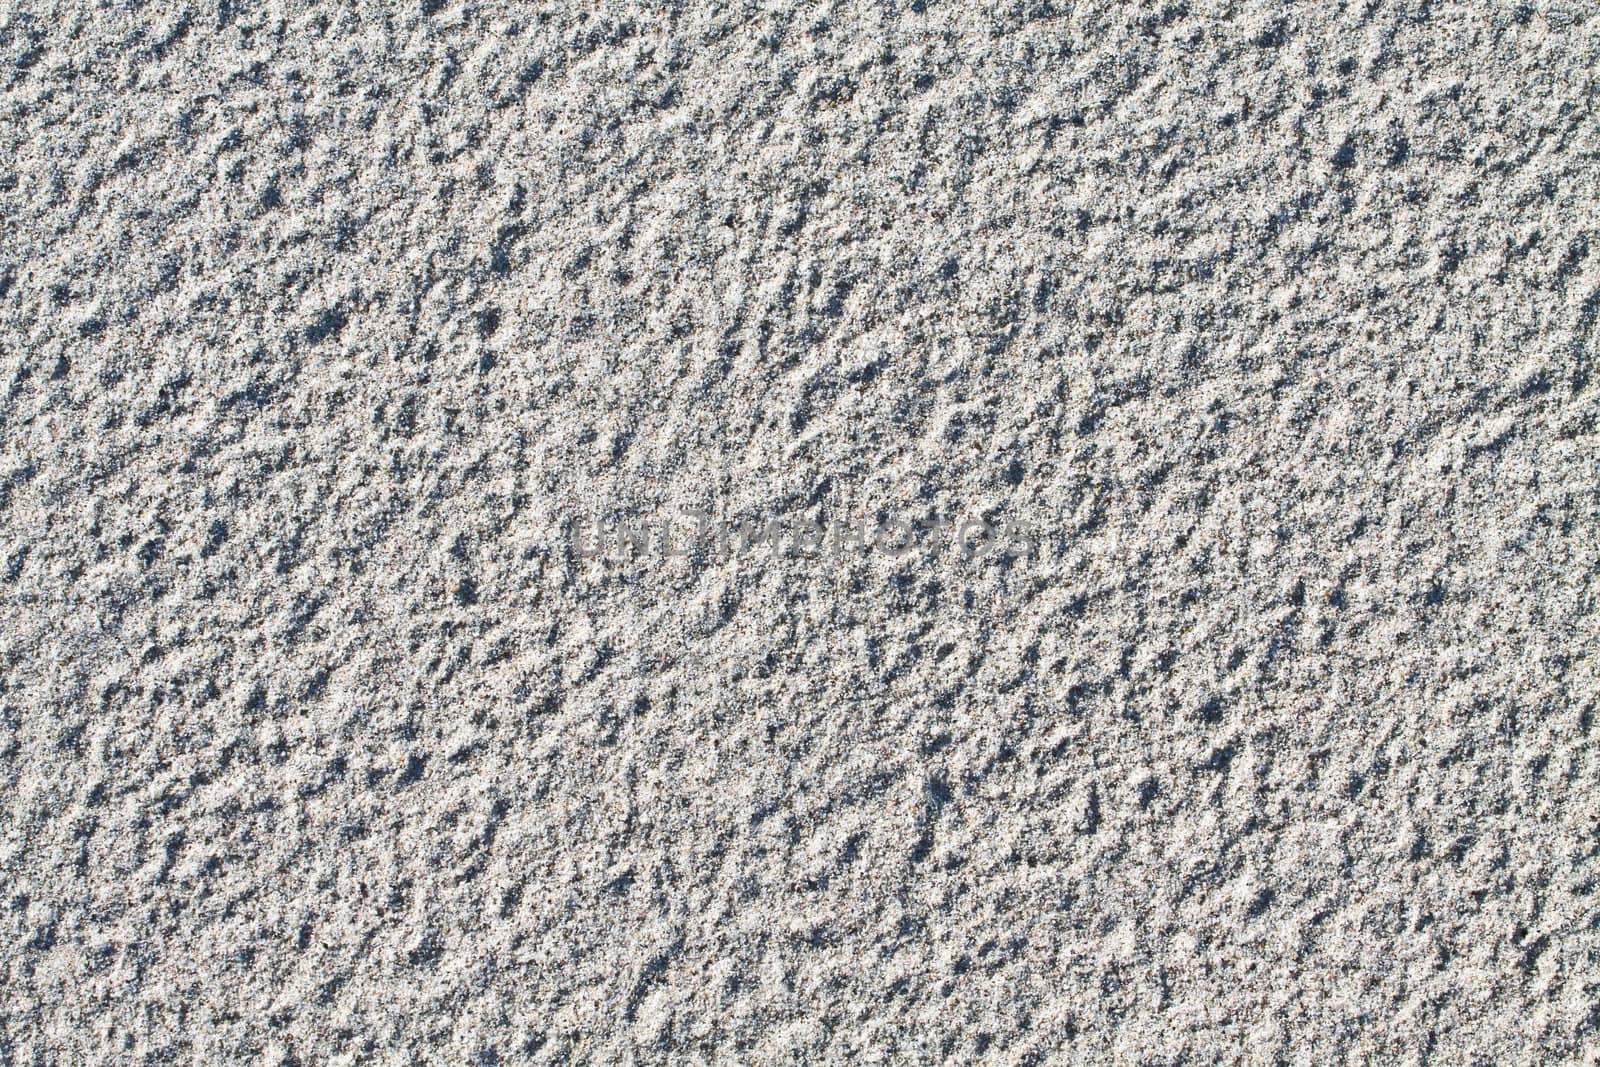 Close up of dry sand ideal for backgrounds and compositions.